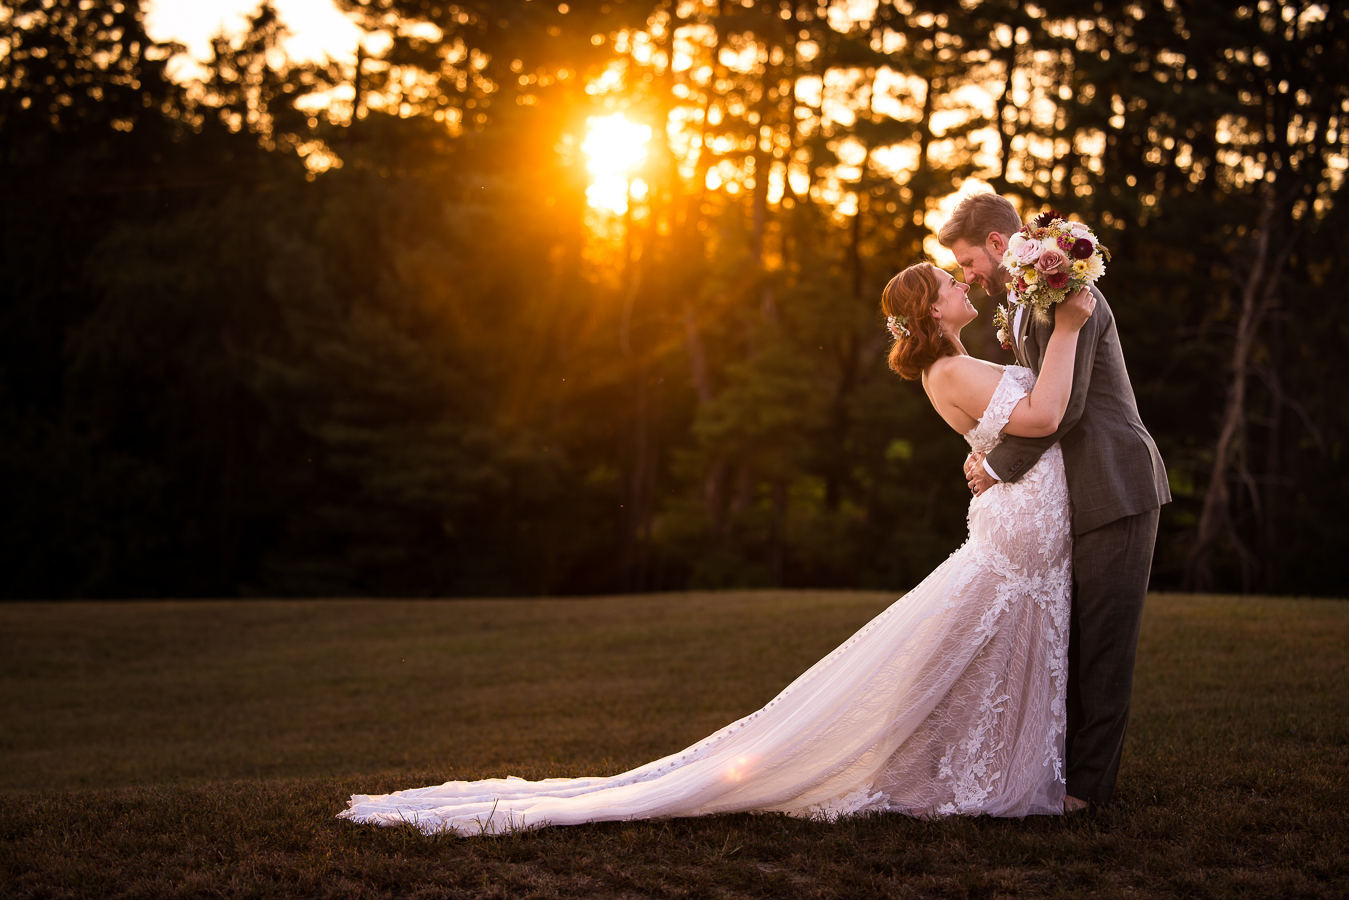 creative maryland wedding photographer, lisa rhinehart, captures this image of the bride and groom as they stand in the grass field embracing one another while the sun beams through the trees behind them during golden hour at this branding photography session 